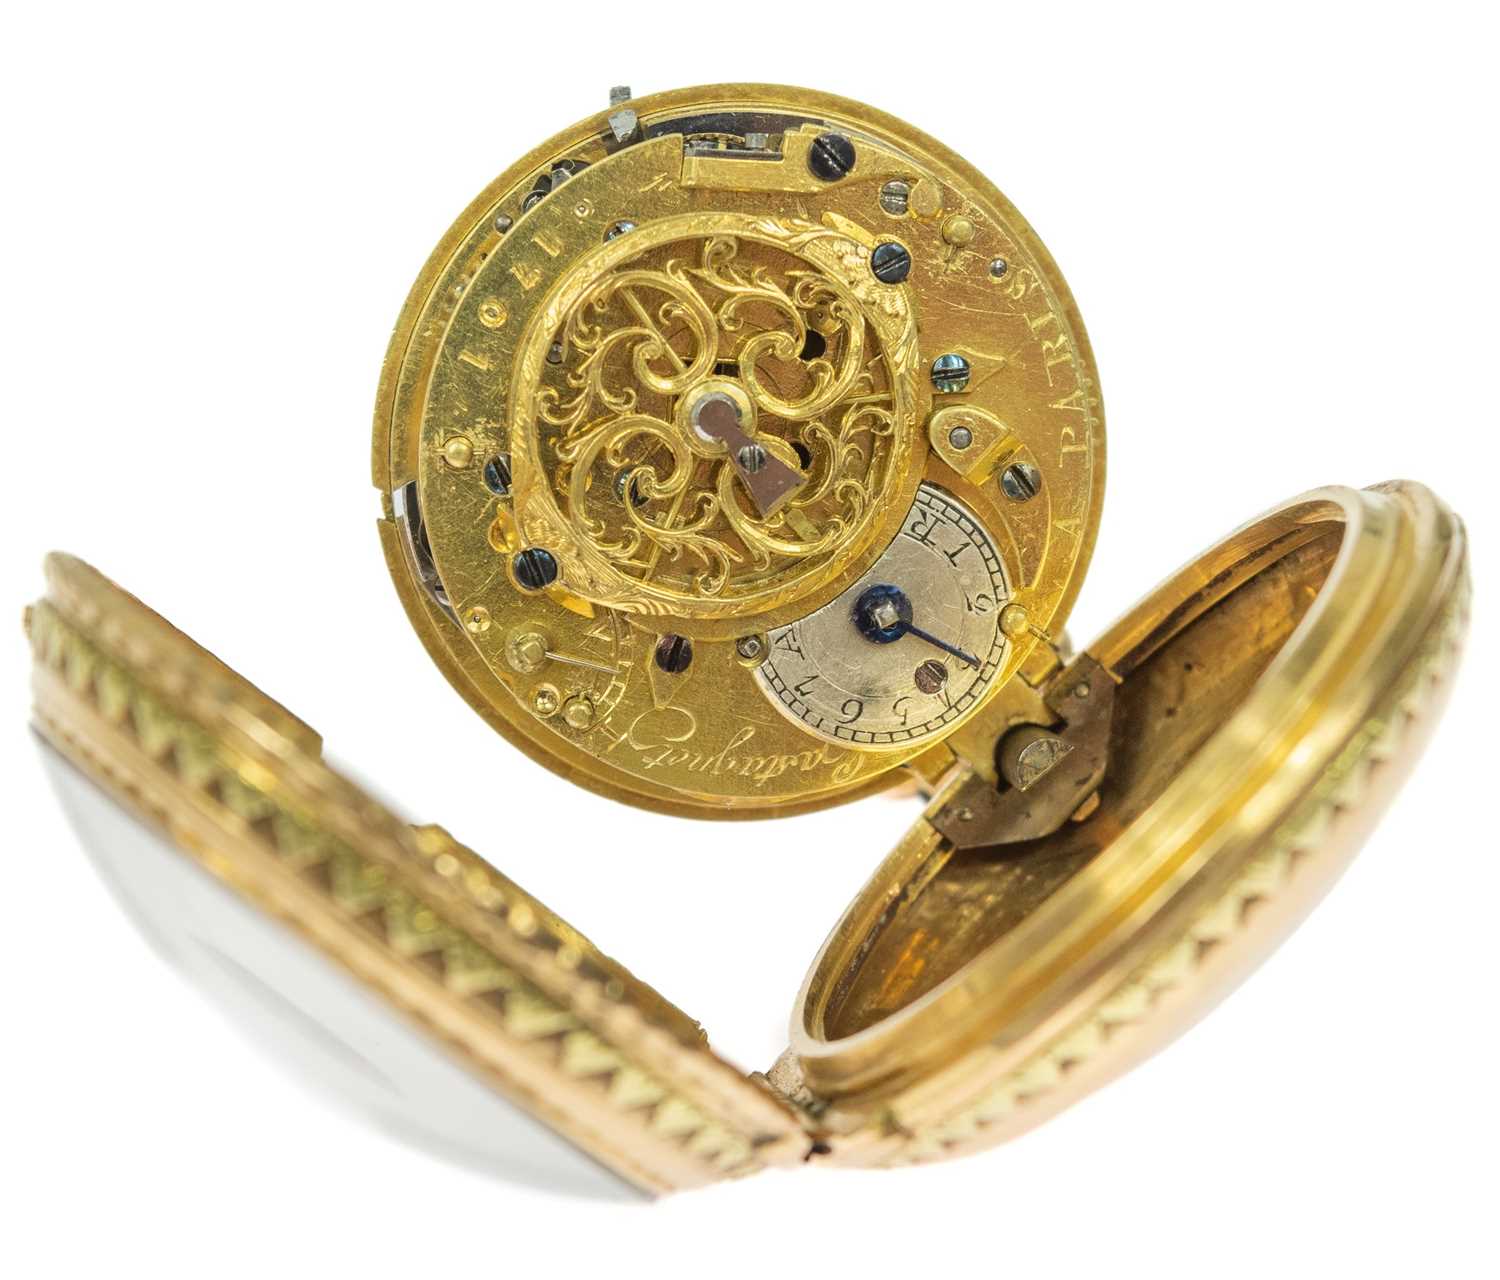 A fine 18th century French 18ct tri-colour gold verge repeating pocket watch by Jaques Castagnet. - Image 3 of 5